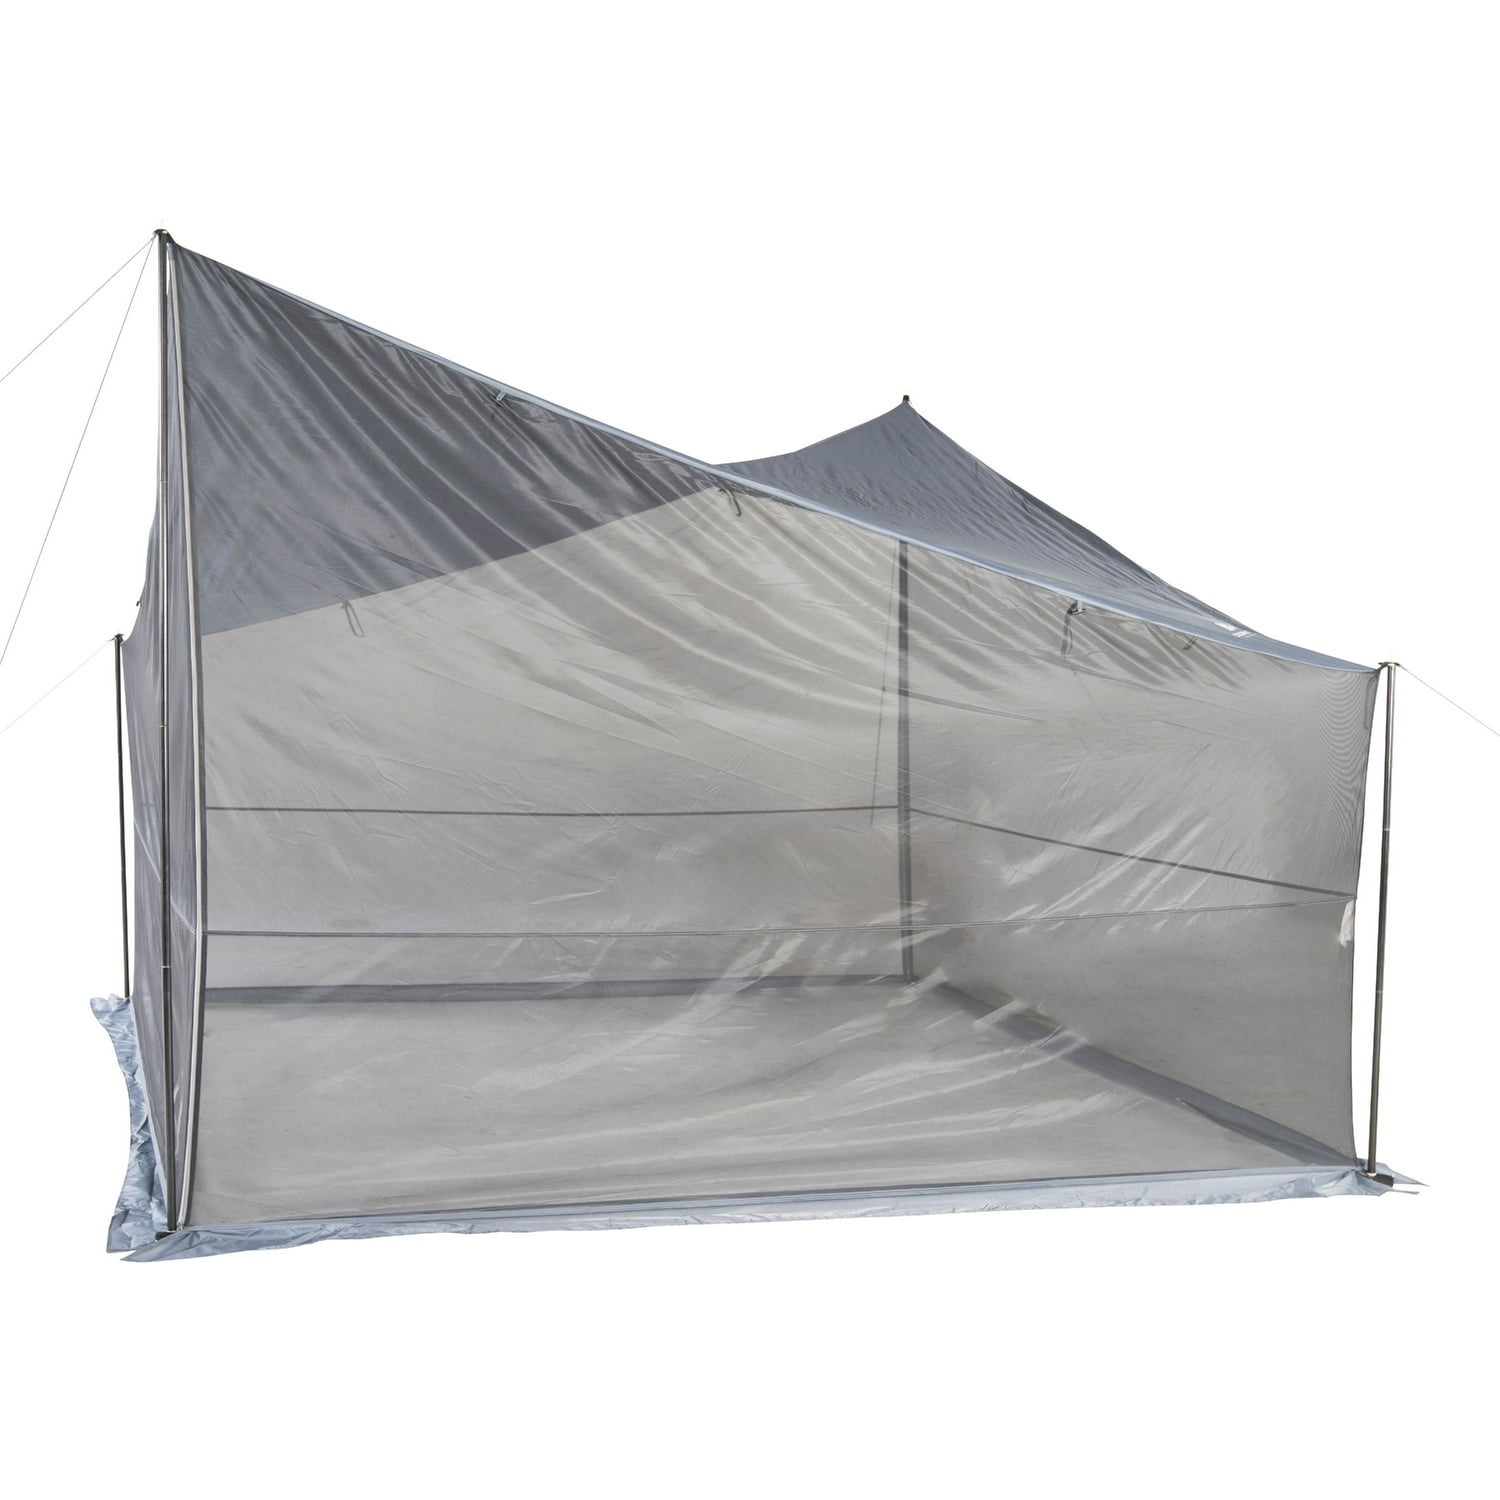 9' x 9' Ozark Trail Tarp Shelter w/ UV Protection and Roll-Up Screen Walls $25.10 + Free Shipping w/ Walmart+ or on $35+